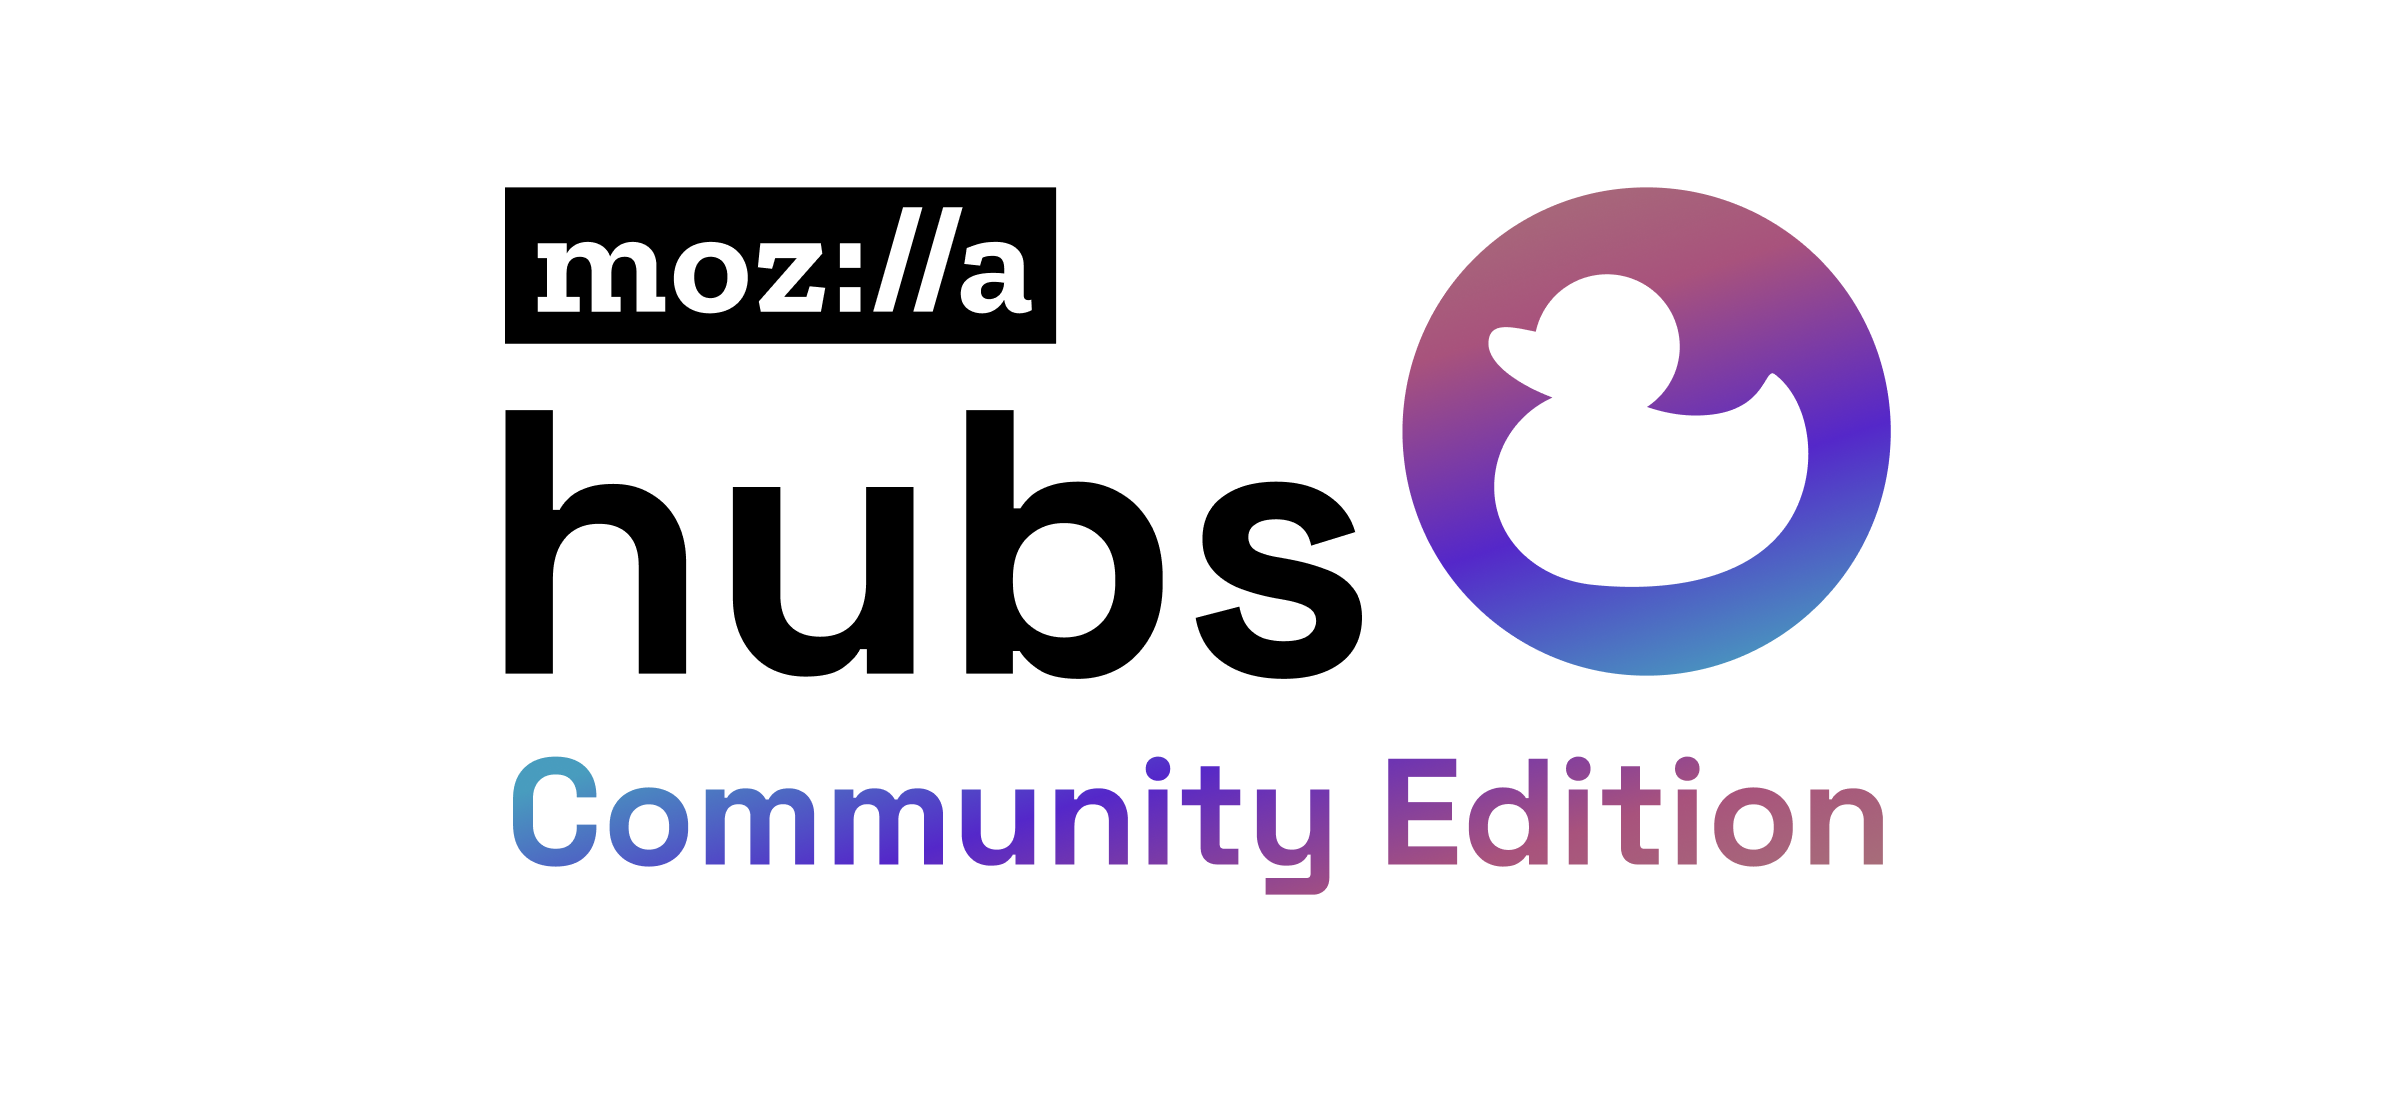 Hubs Cloud Community Edition Is Here!